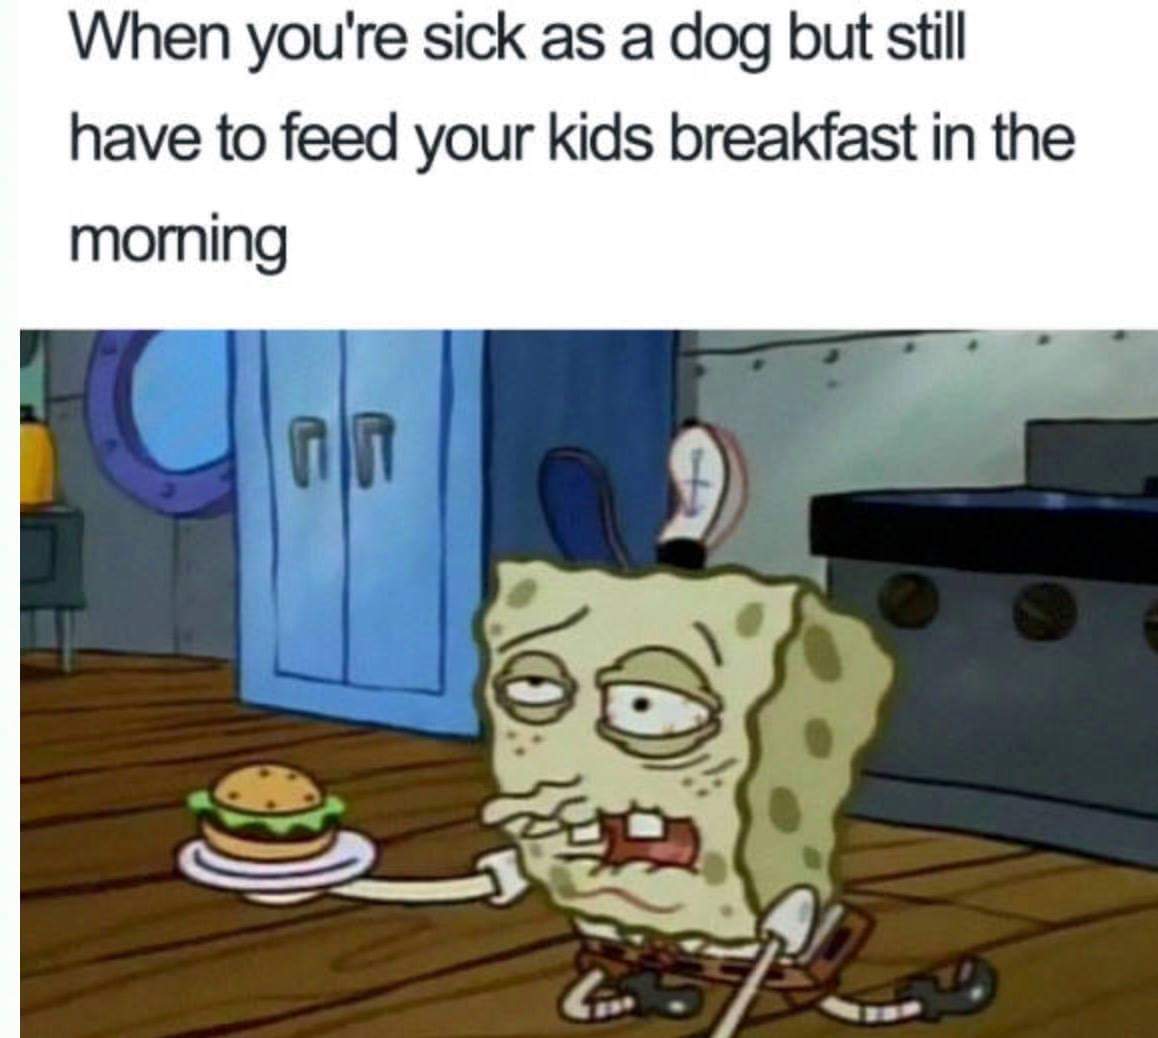 dank meme - mom is sick meme - When you're sick as a dog but still have to feed your kids breakfast in the morning